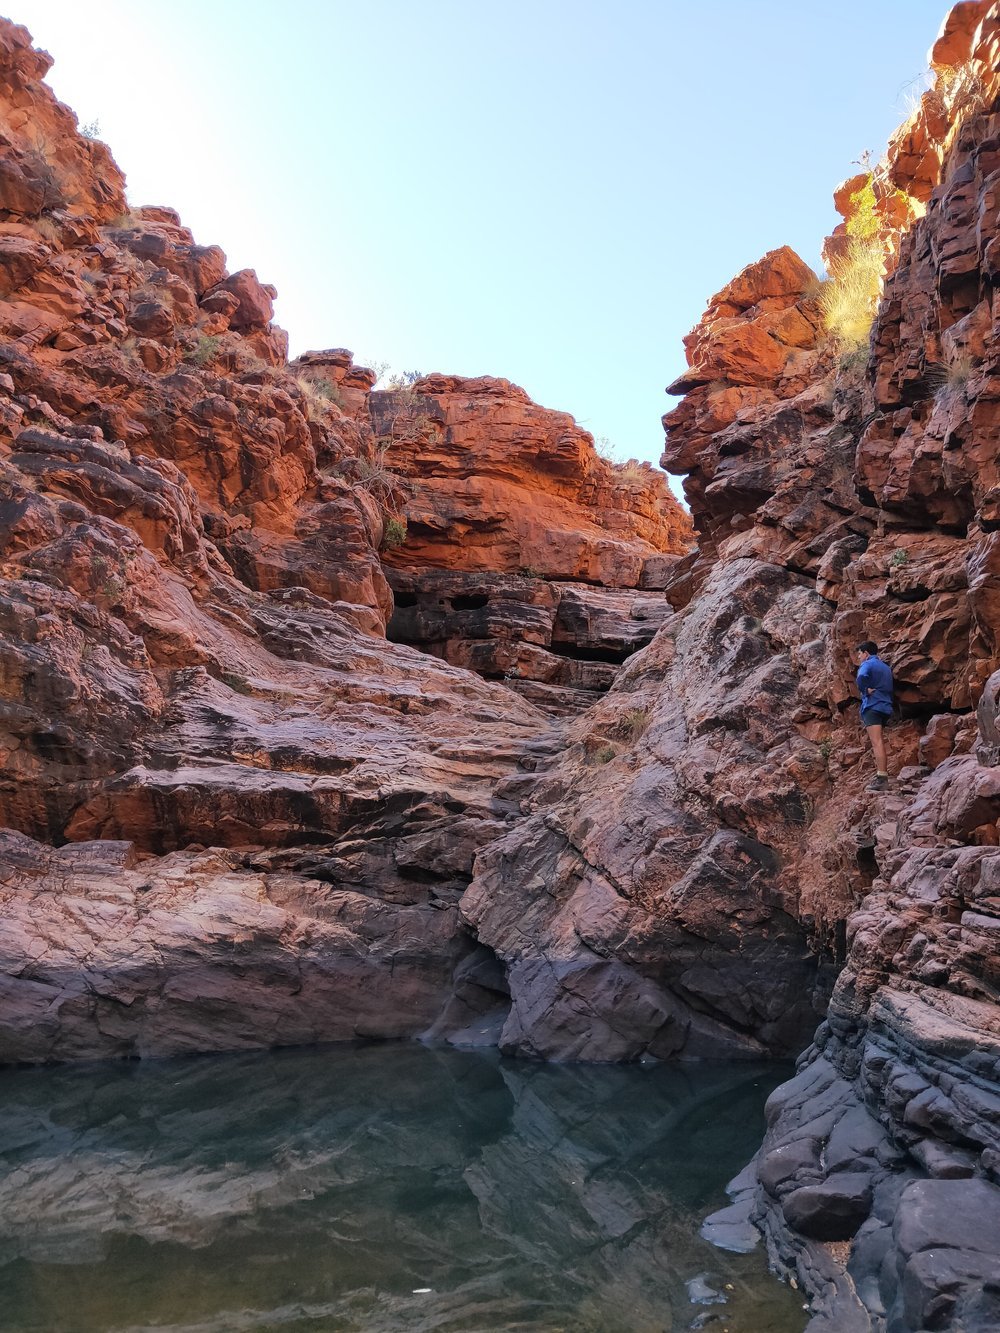  Owen climbs through rockholes and gorges in the east macs near Alice Springs 